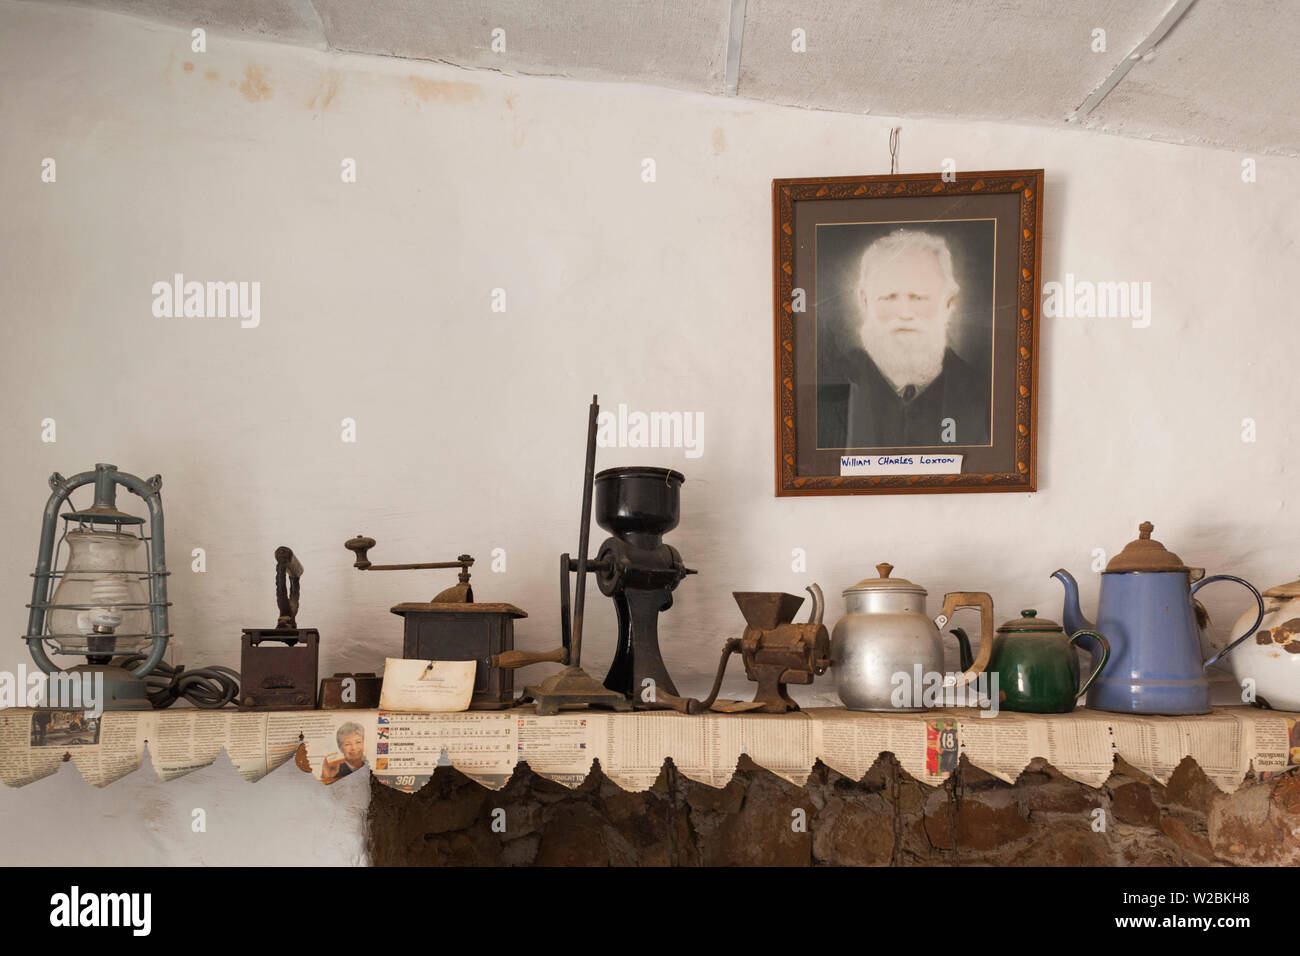 Australia, South Australia, Murray River Valley, Loxton, Loxton Historical Village, house interior with portrait of William Charles Loxton, town founder Stock Photo